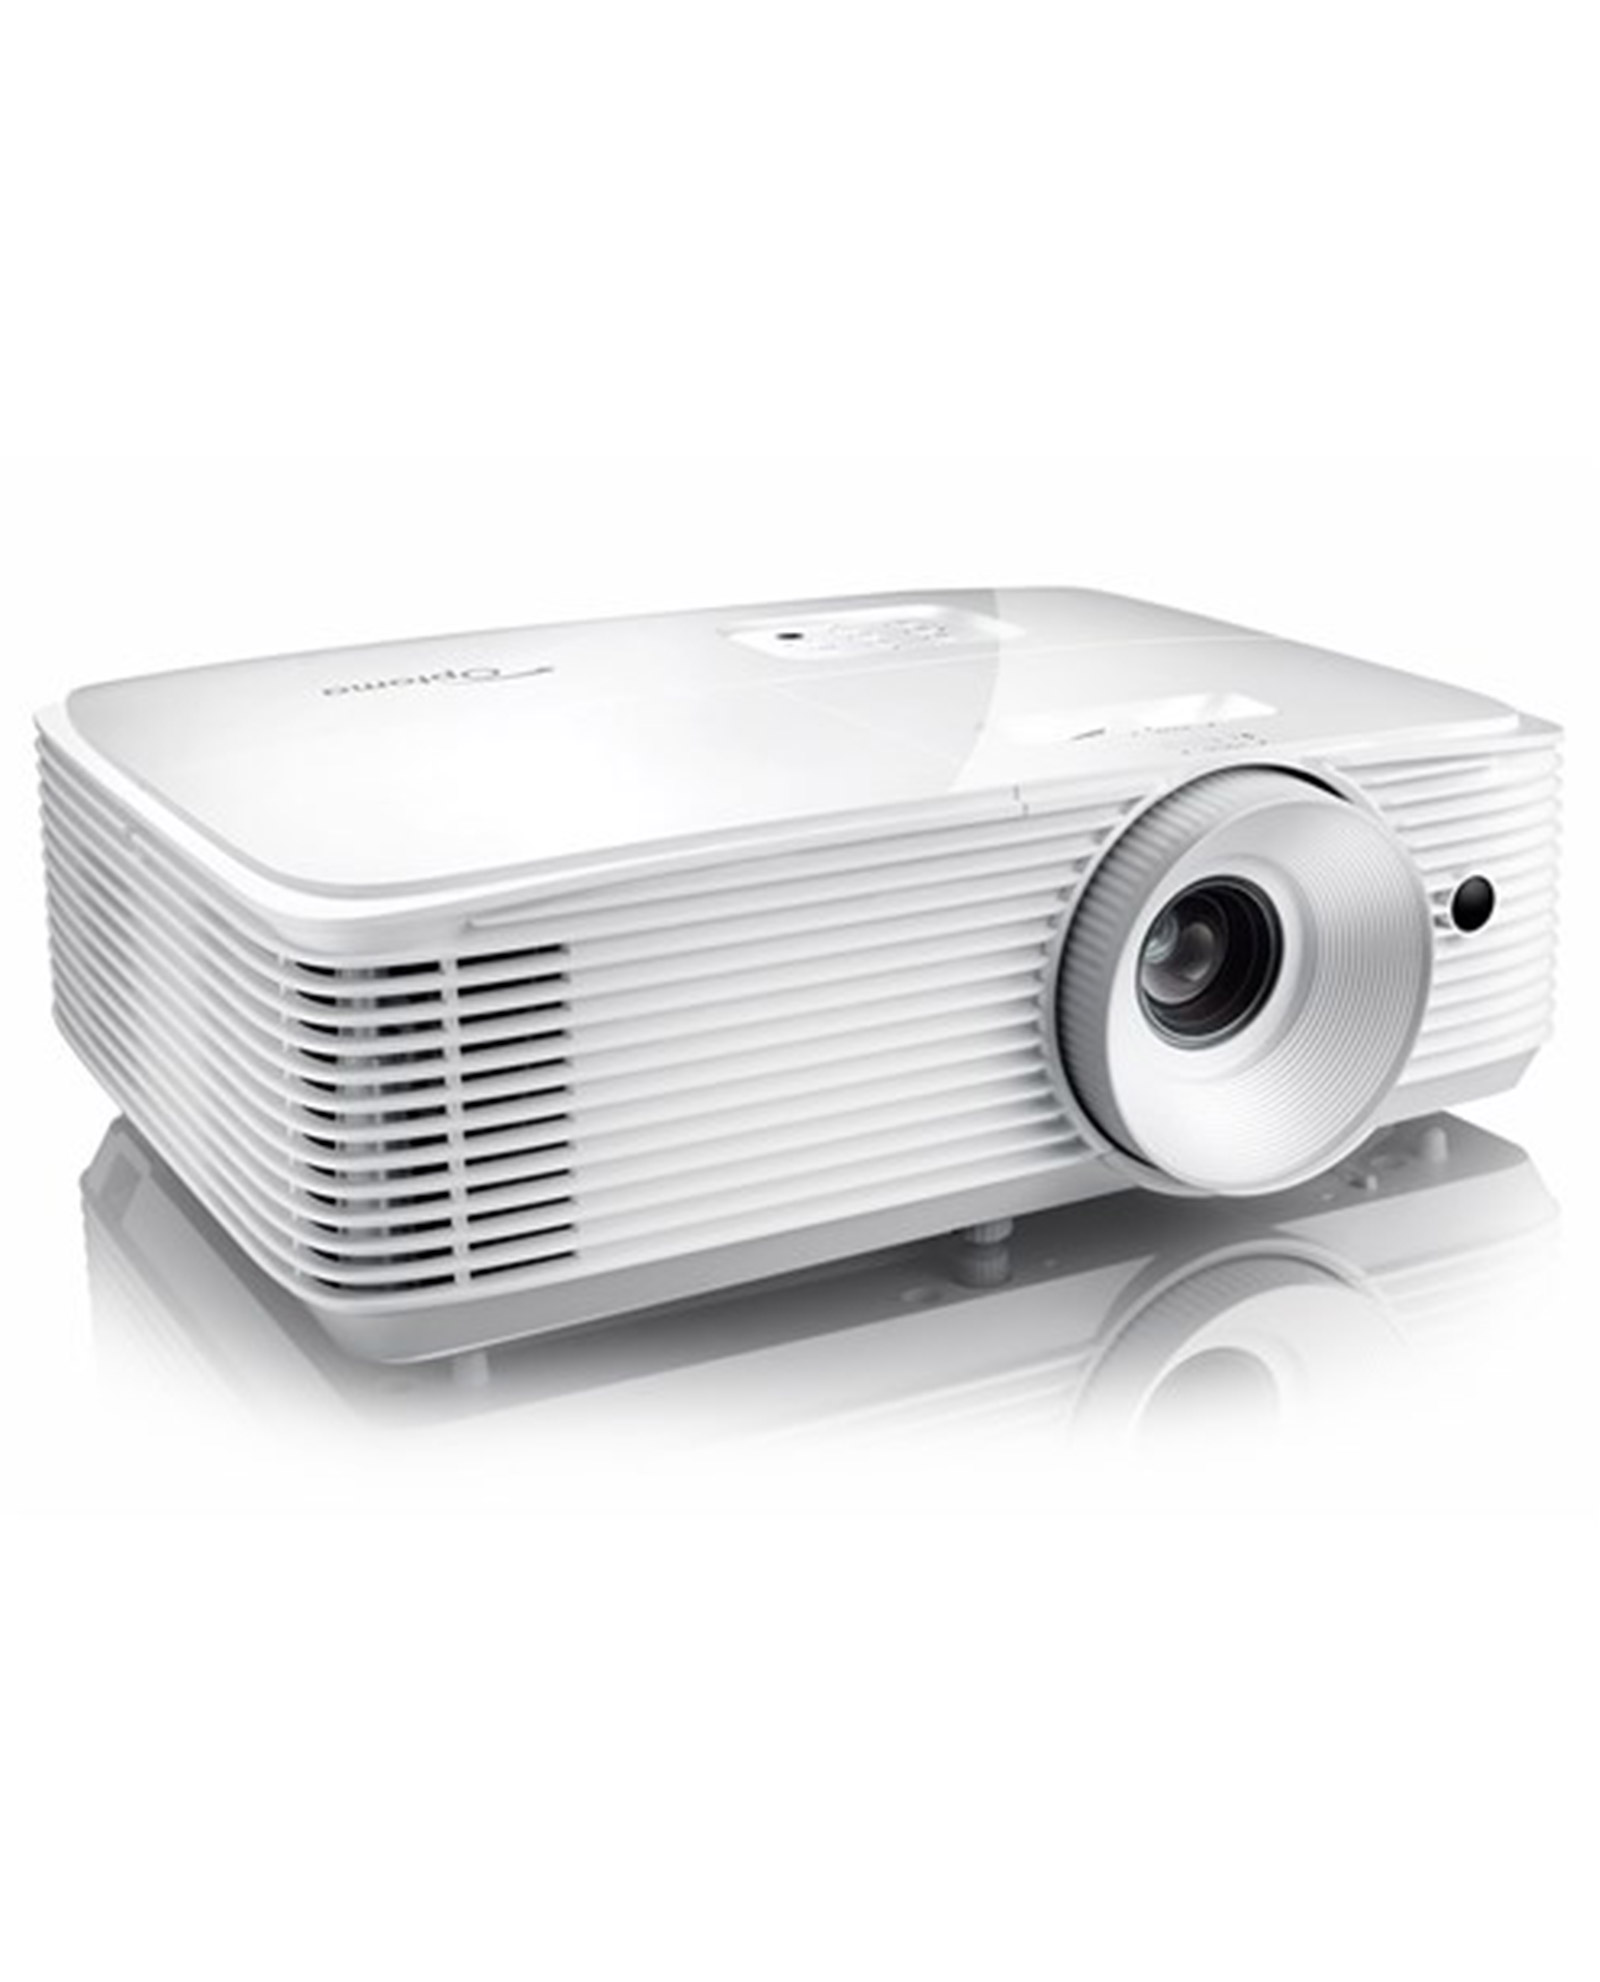 Optoma Hd30hdr 3800lm 1080p 50000 1 Home Theatre Projector 4